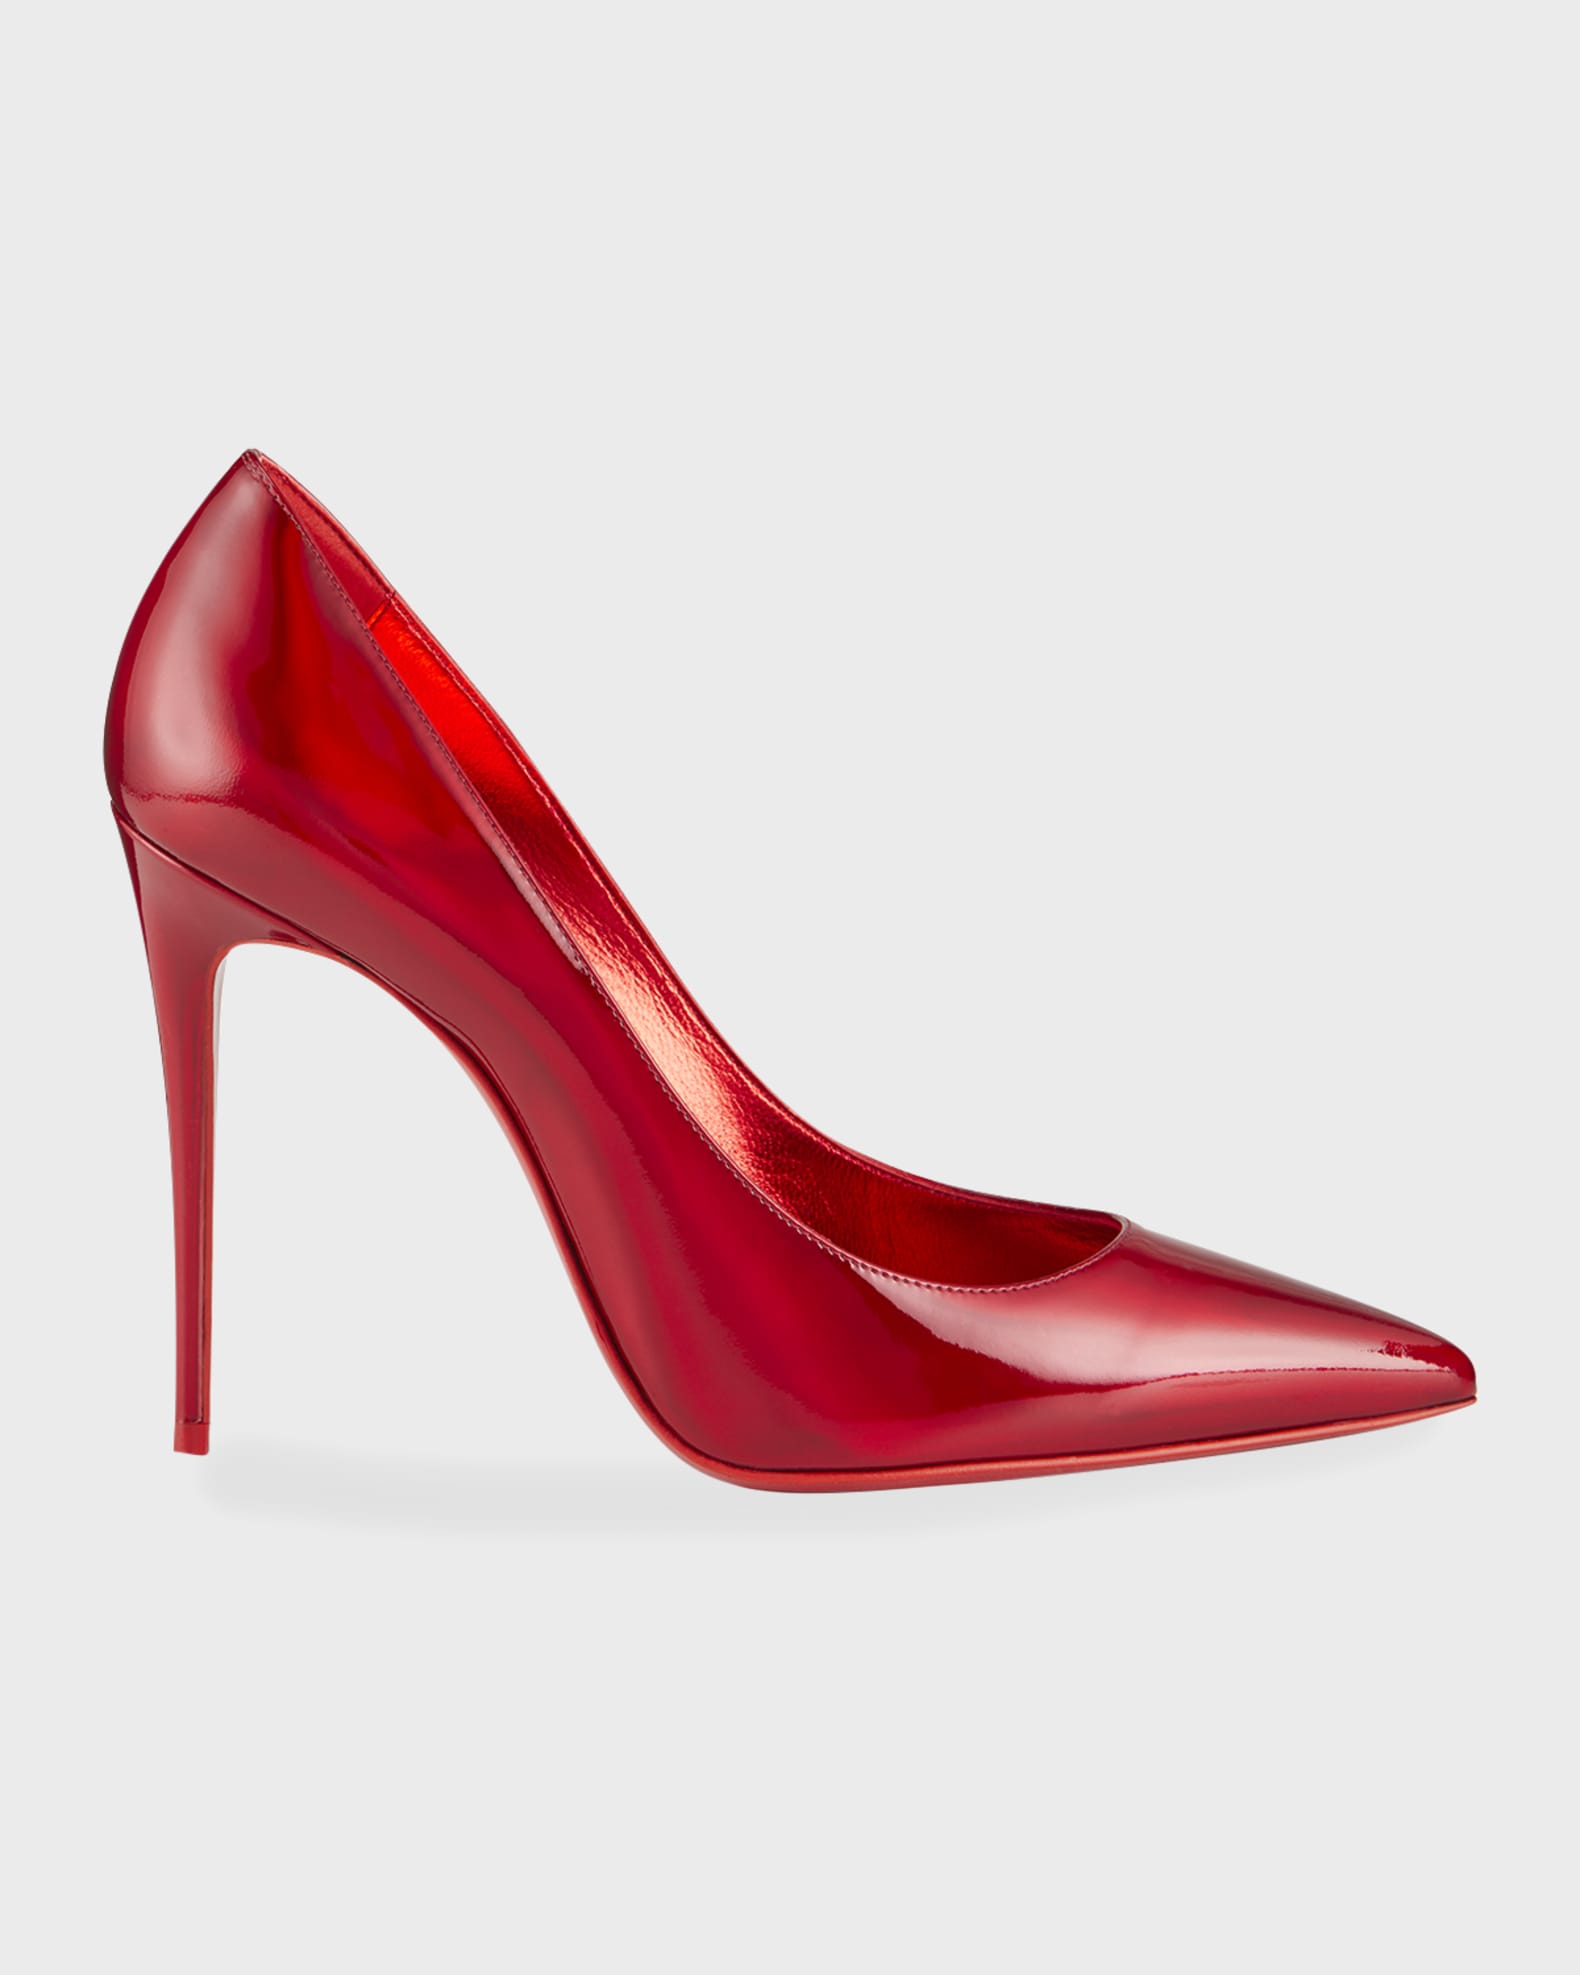 Christian Louboutin So Kate Psychic Pointed Toe Pump (Women